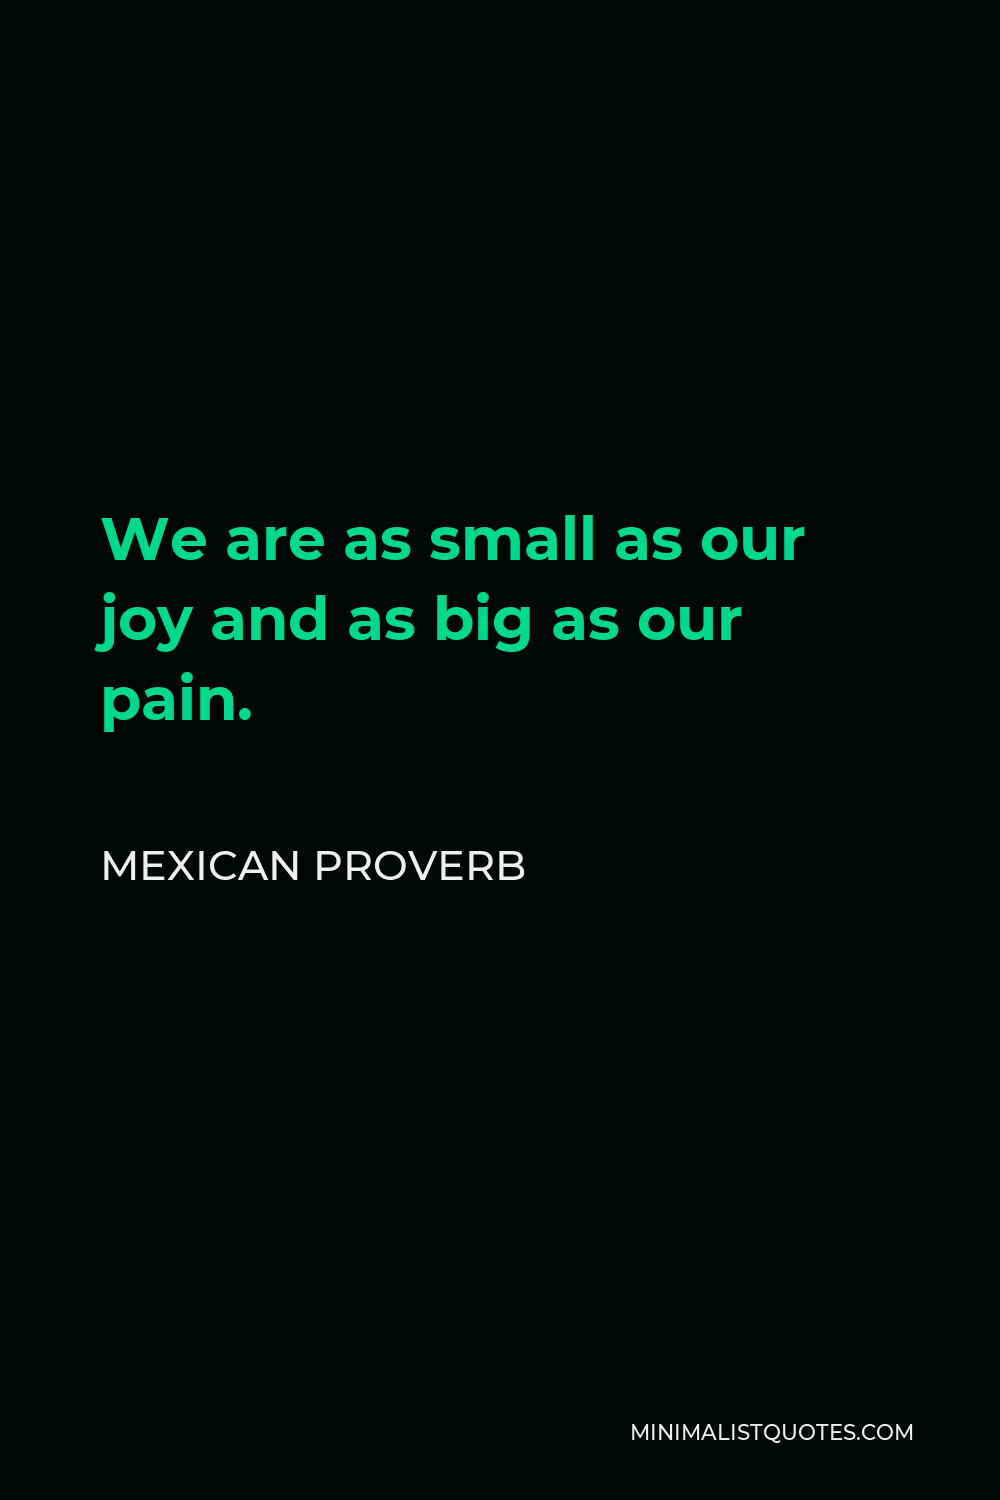 Mexican Proverb Quote - We are as small as our joy and as big as our pain.